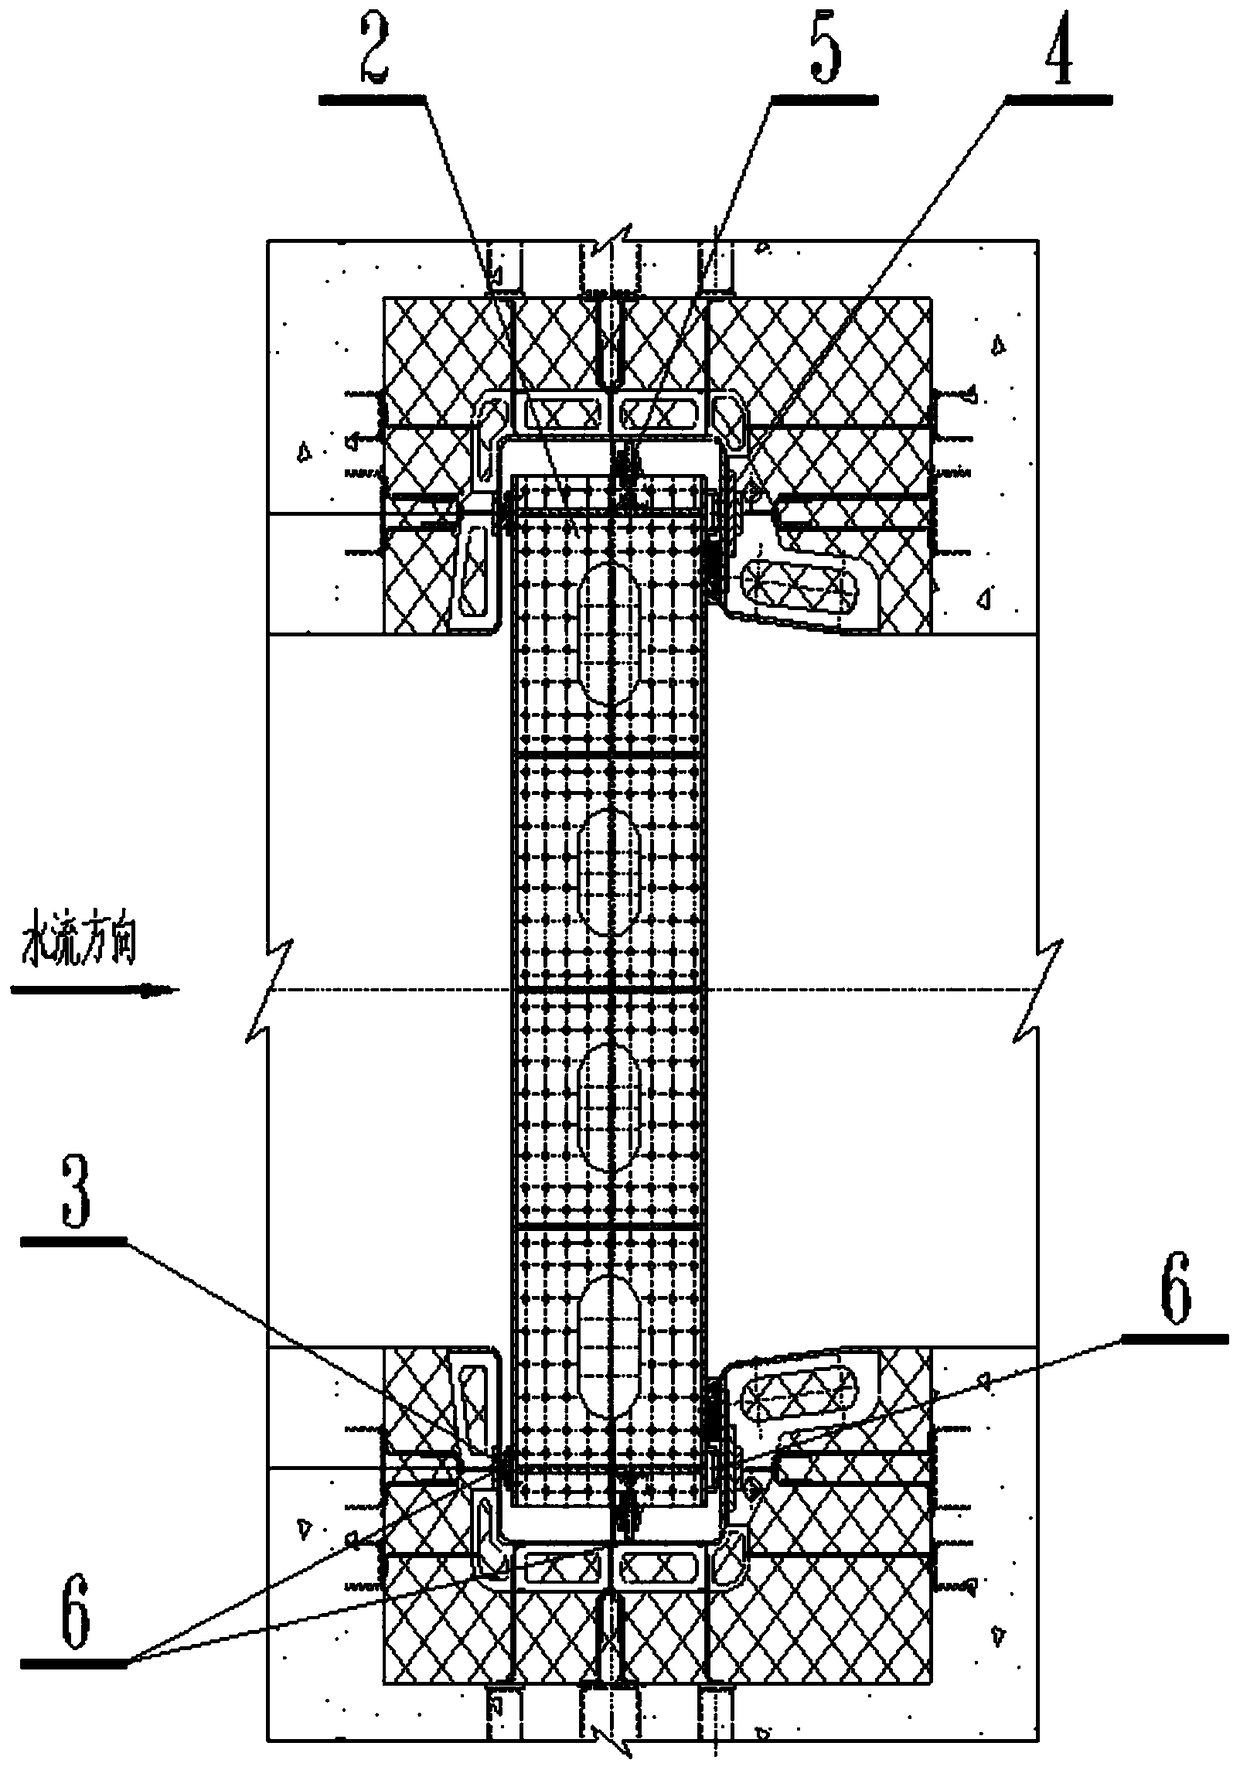 Improvement method and structure of a plane sliding gate with extra high water head